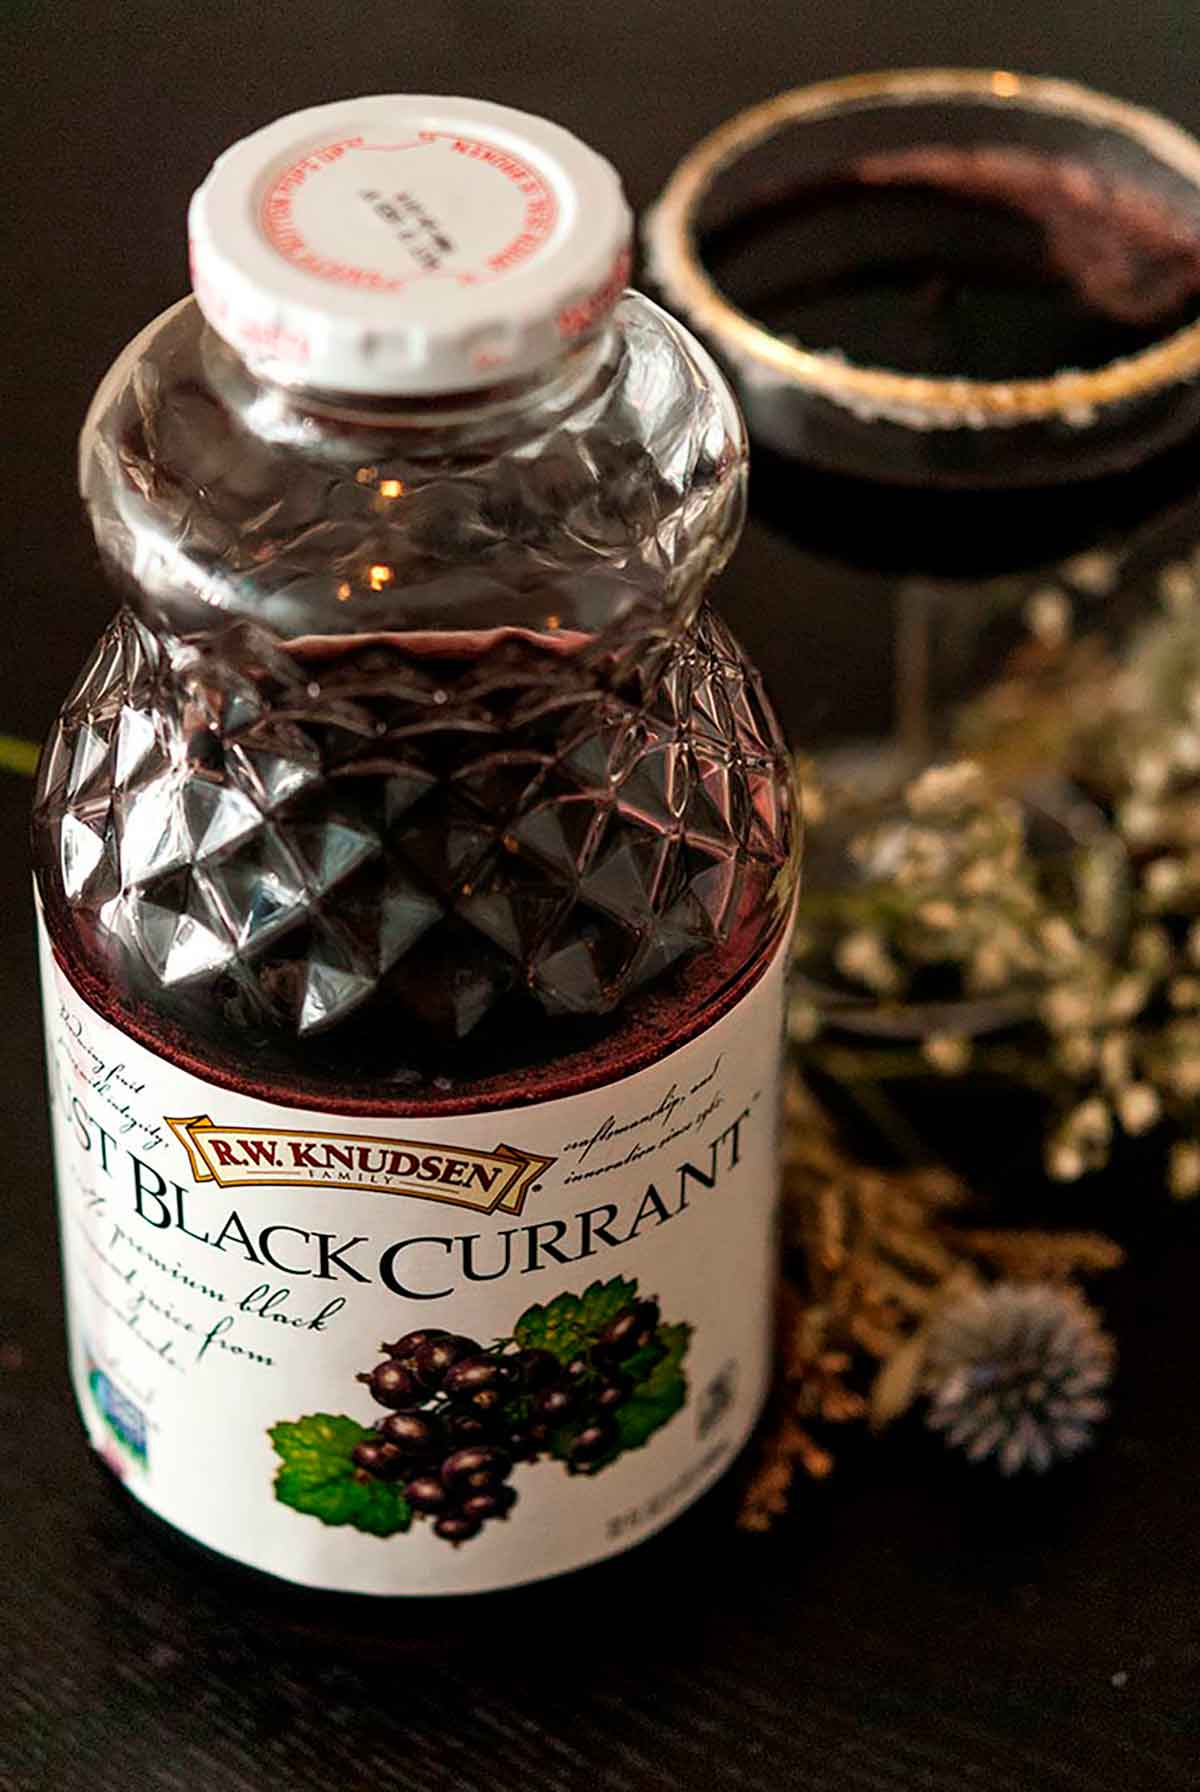 A bottle of black currant juice in front of a sugar-rimmed cocktail and dry baby's breath flowers.